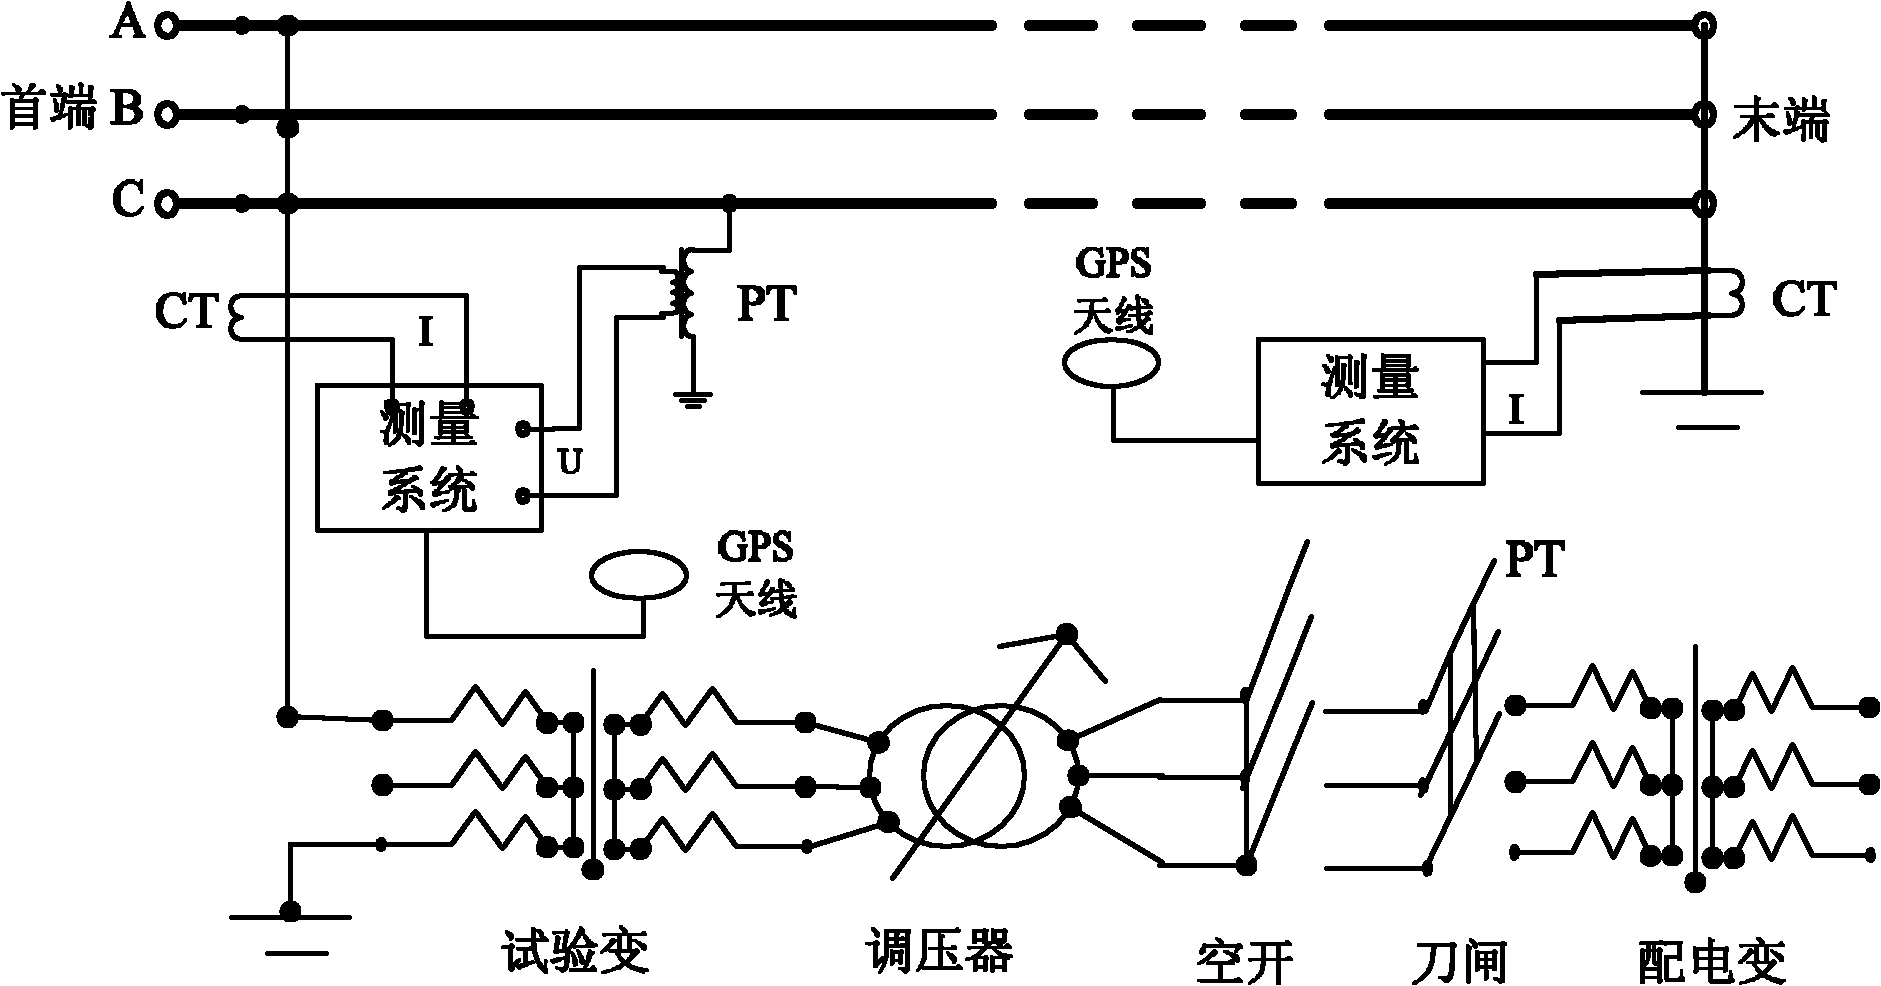 Anti-interference measurement method for zero sequence impedance of super-high-voltage/ultrahigh-voltage multi-loop power transmission line